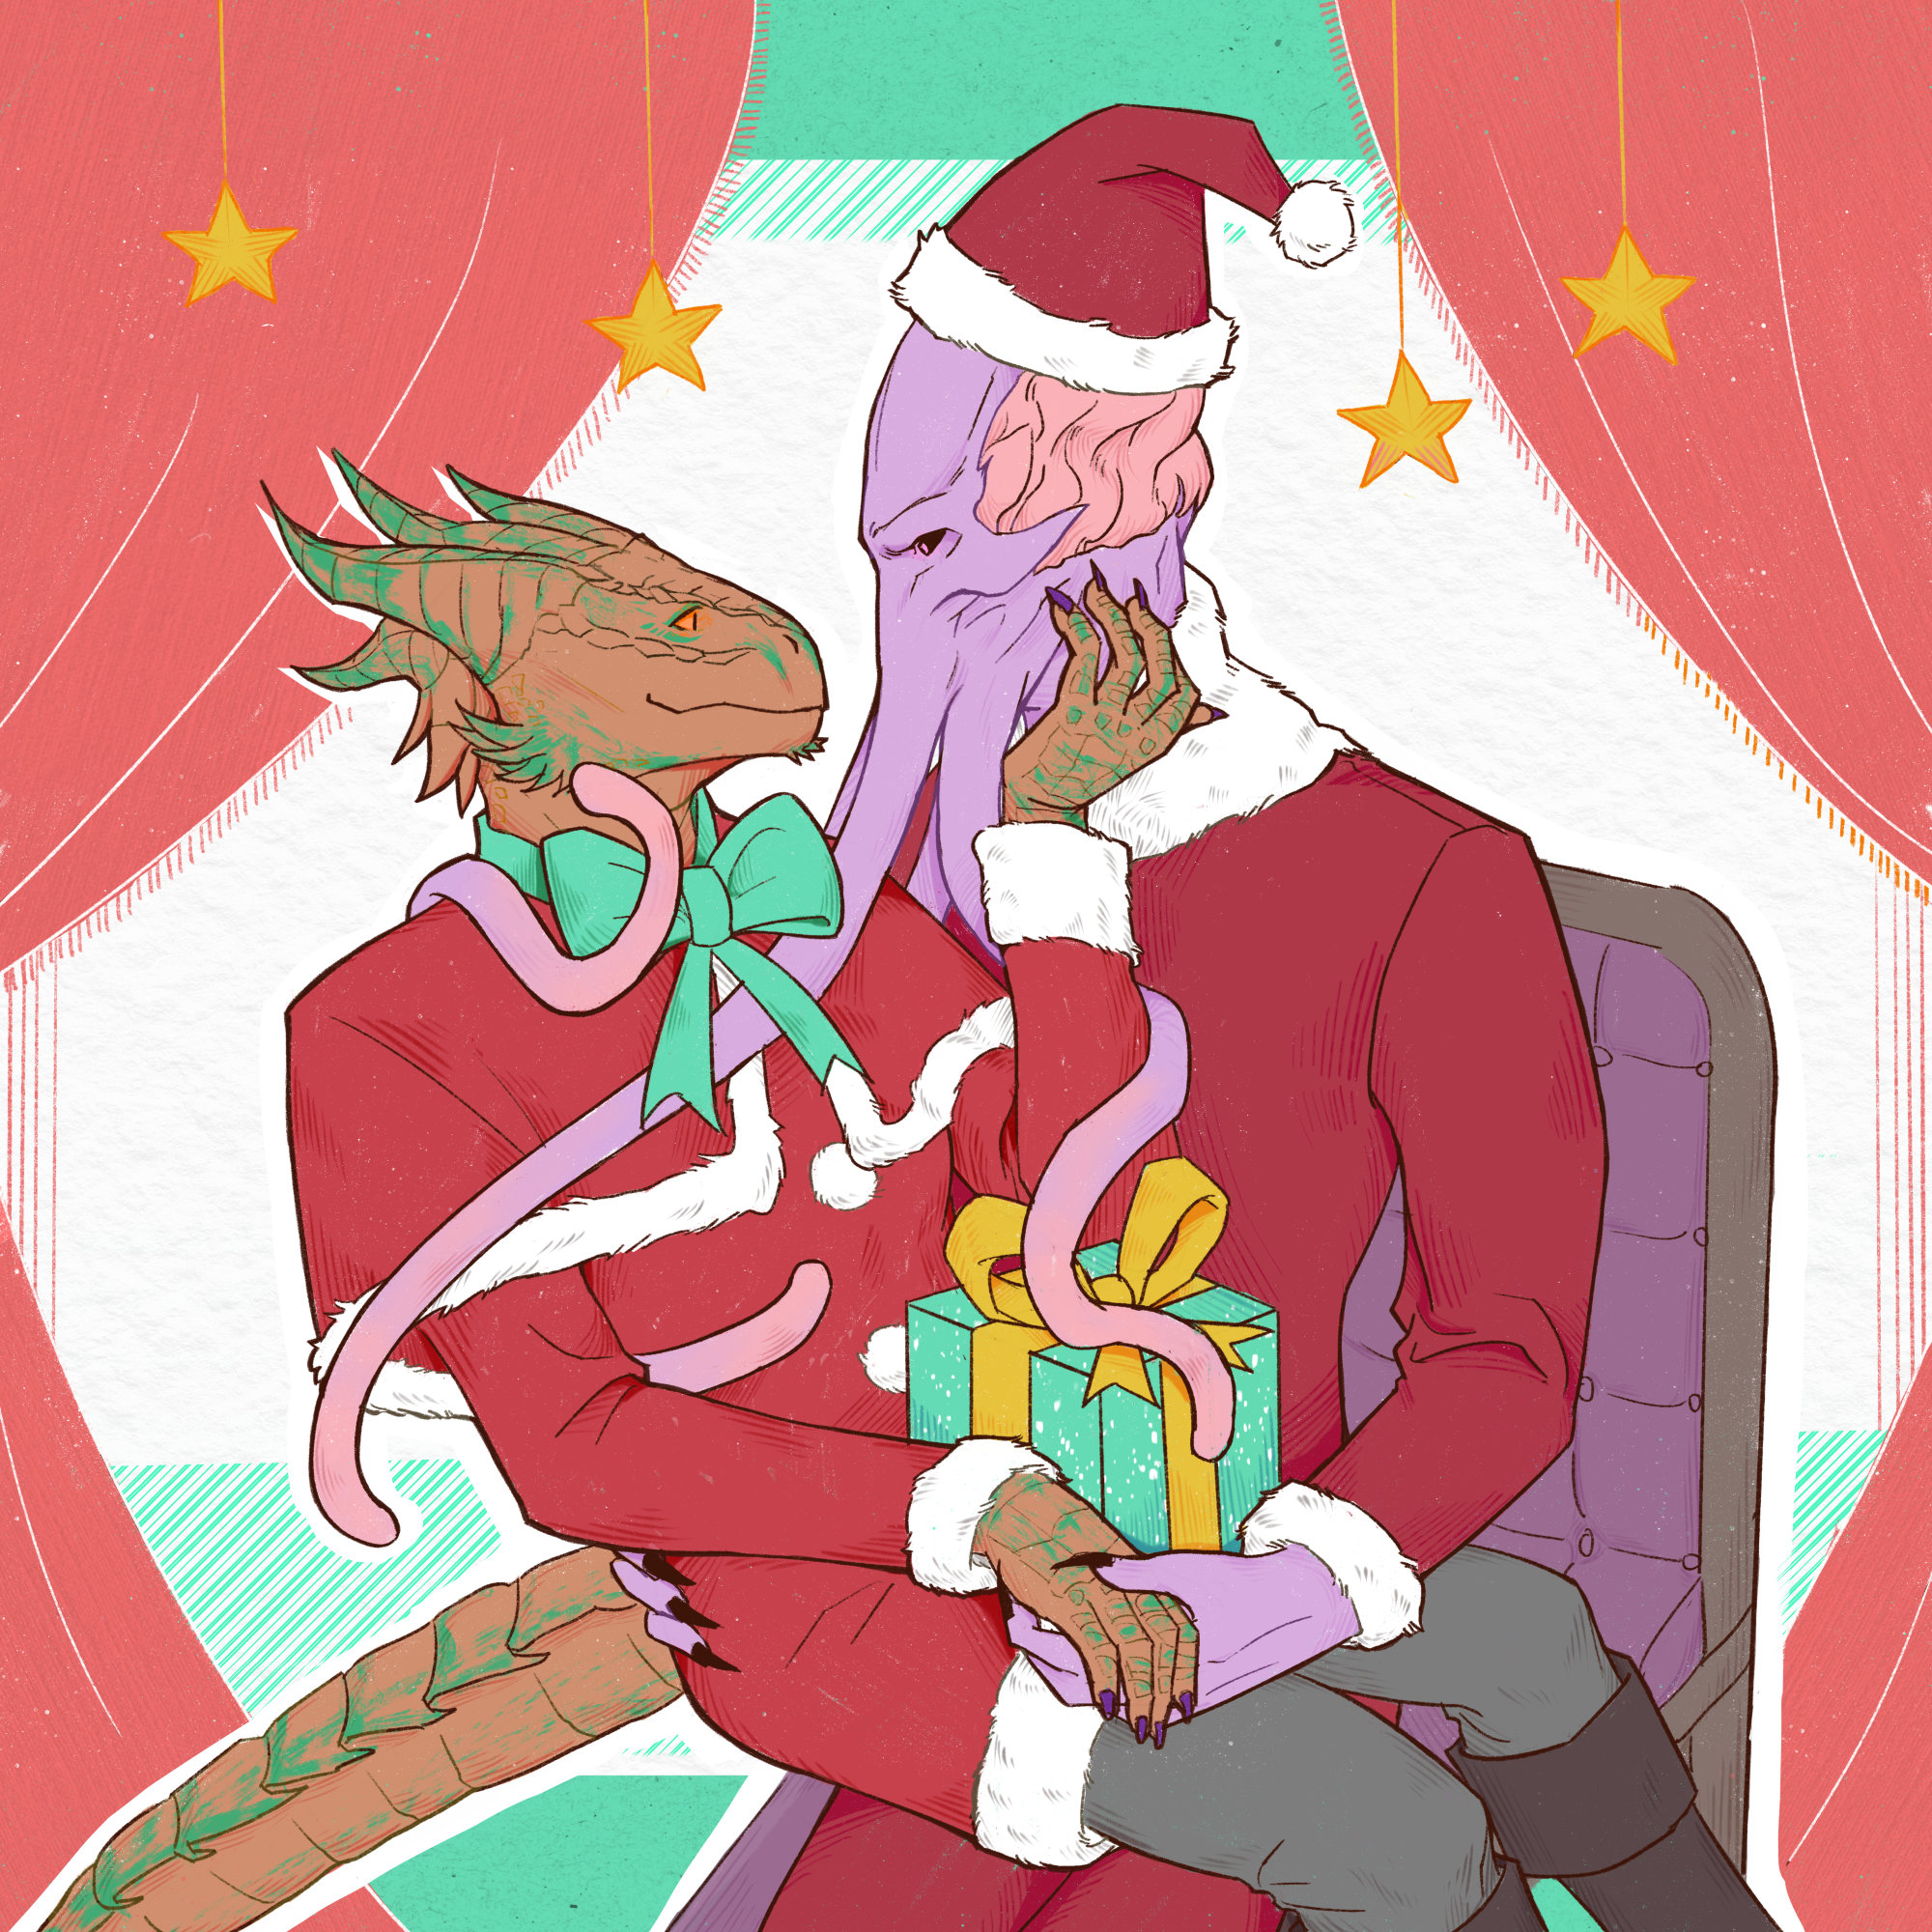 Daamric (a bronze Dragonborn) and the Emperor are dressed in Christmas-style red outfits. Daamric is sitting on the Emperor's lap with a present on his lap. They're looking lovingly at each other.